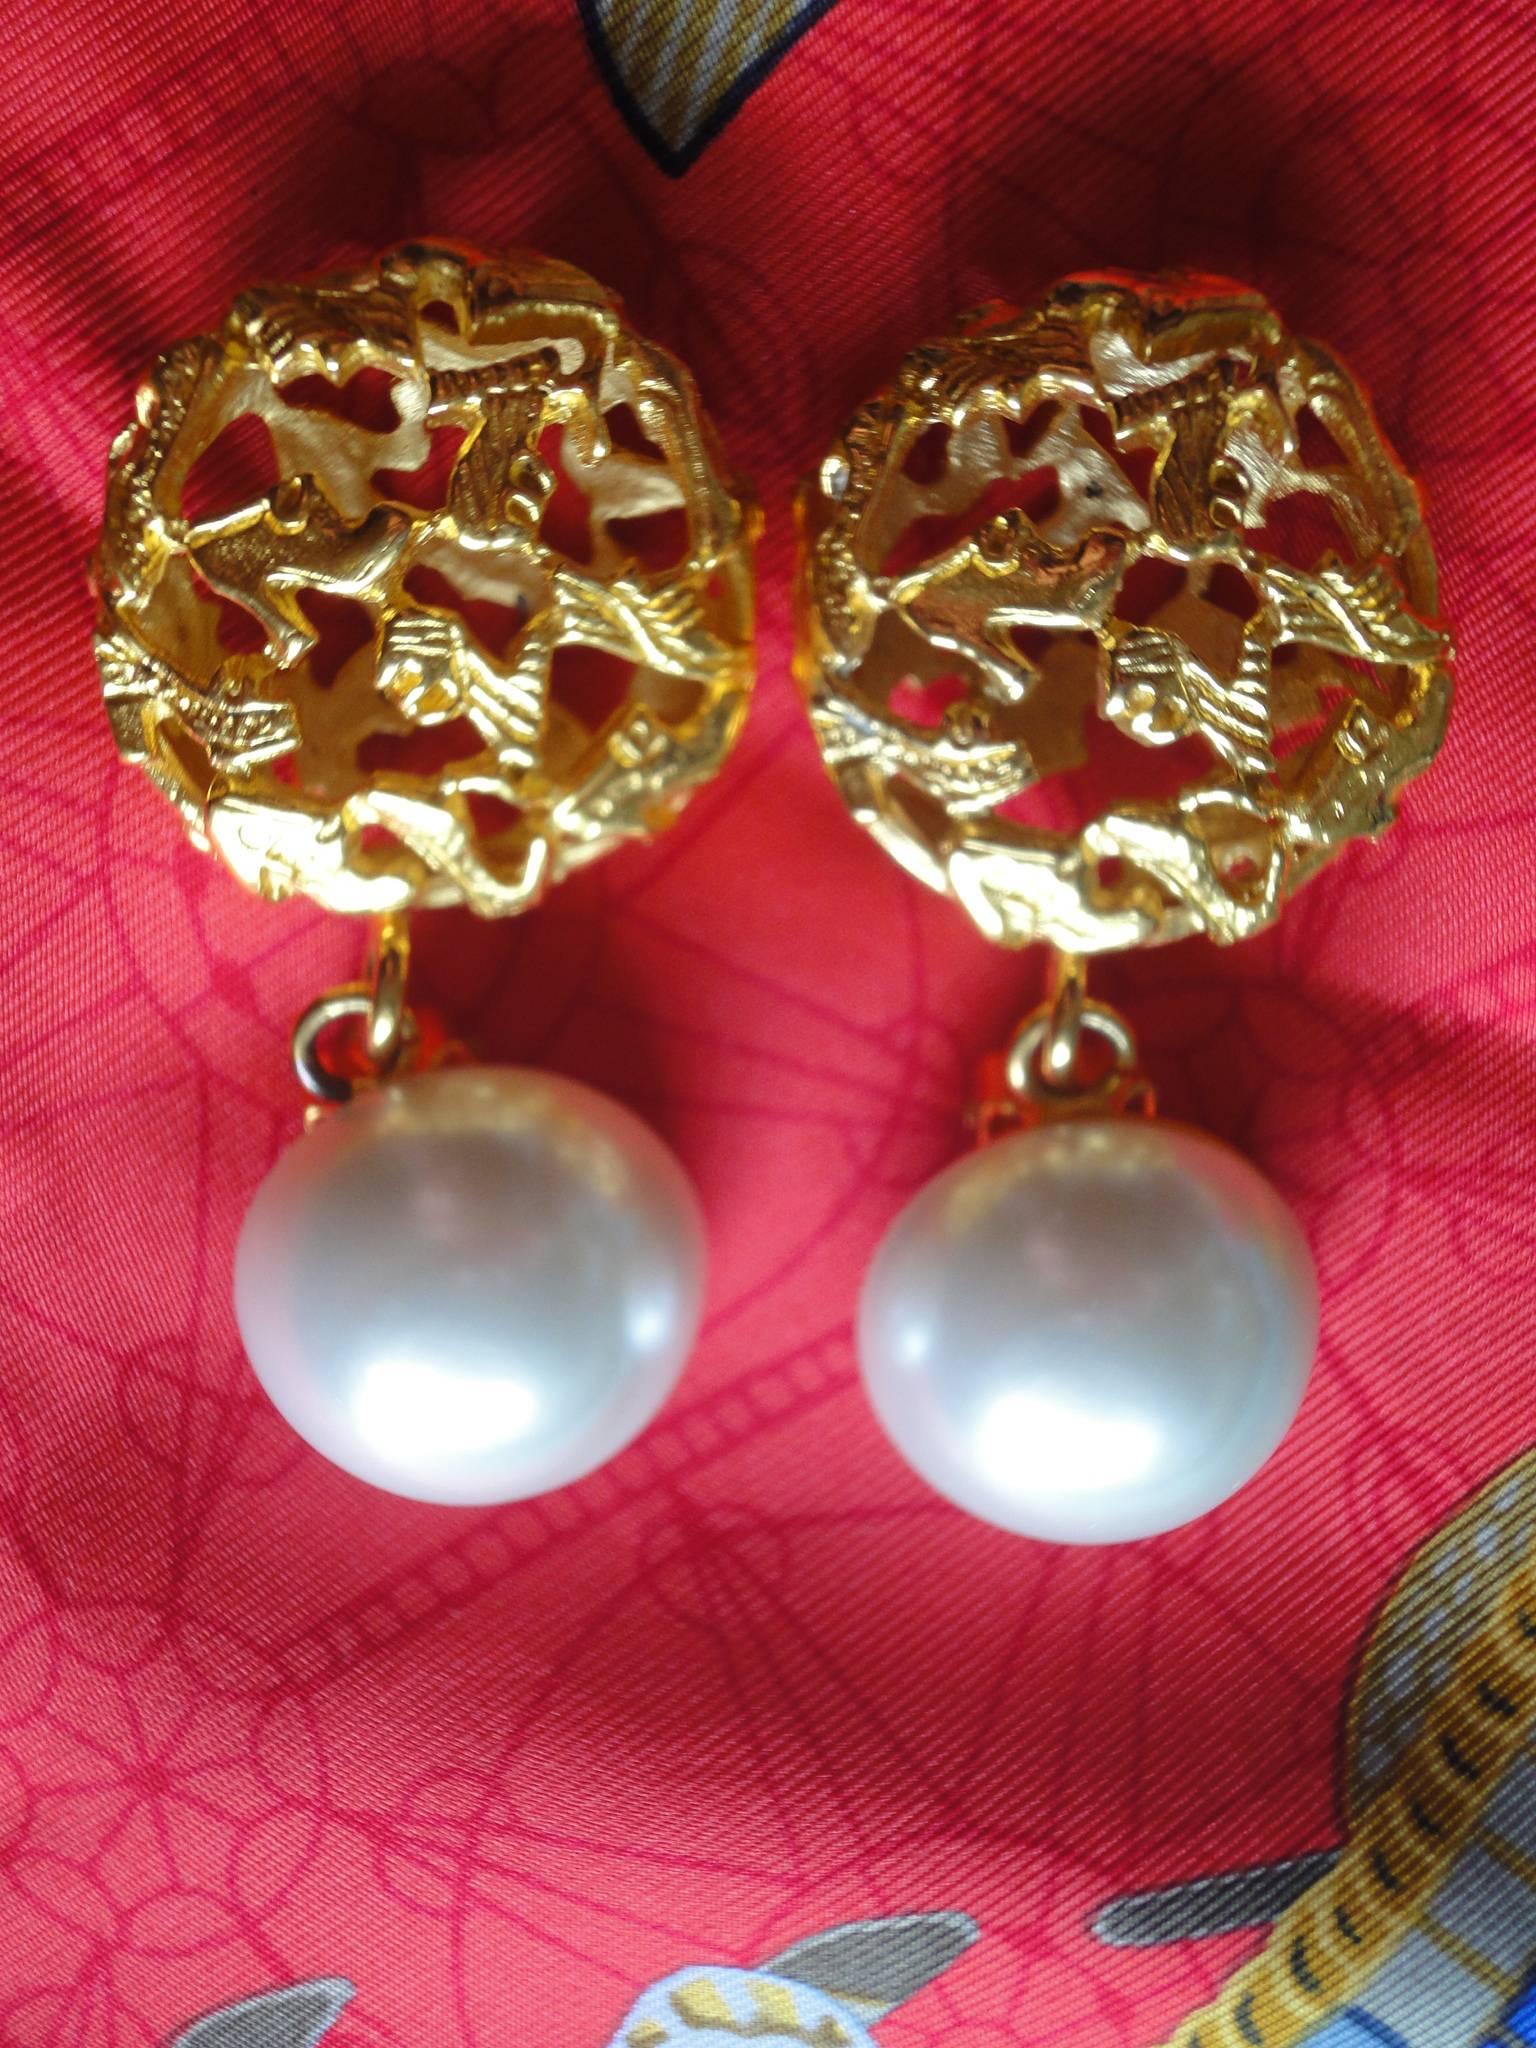 Vintage Salvatore Ferragamo white faux pearl earrings with golden shoe design featured charm. Ferragamo dangling earrings.

Introducing a vintage Salvatore Ferragamo faux pearl earrings with golden motif.
One of a kind earrings from Ferragamo!